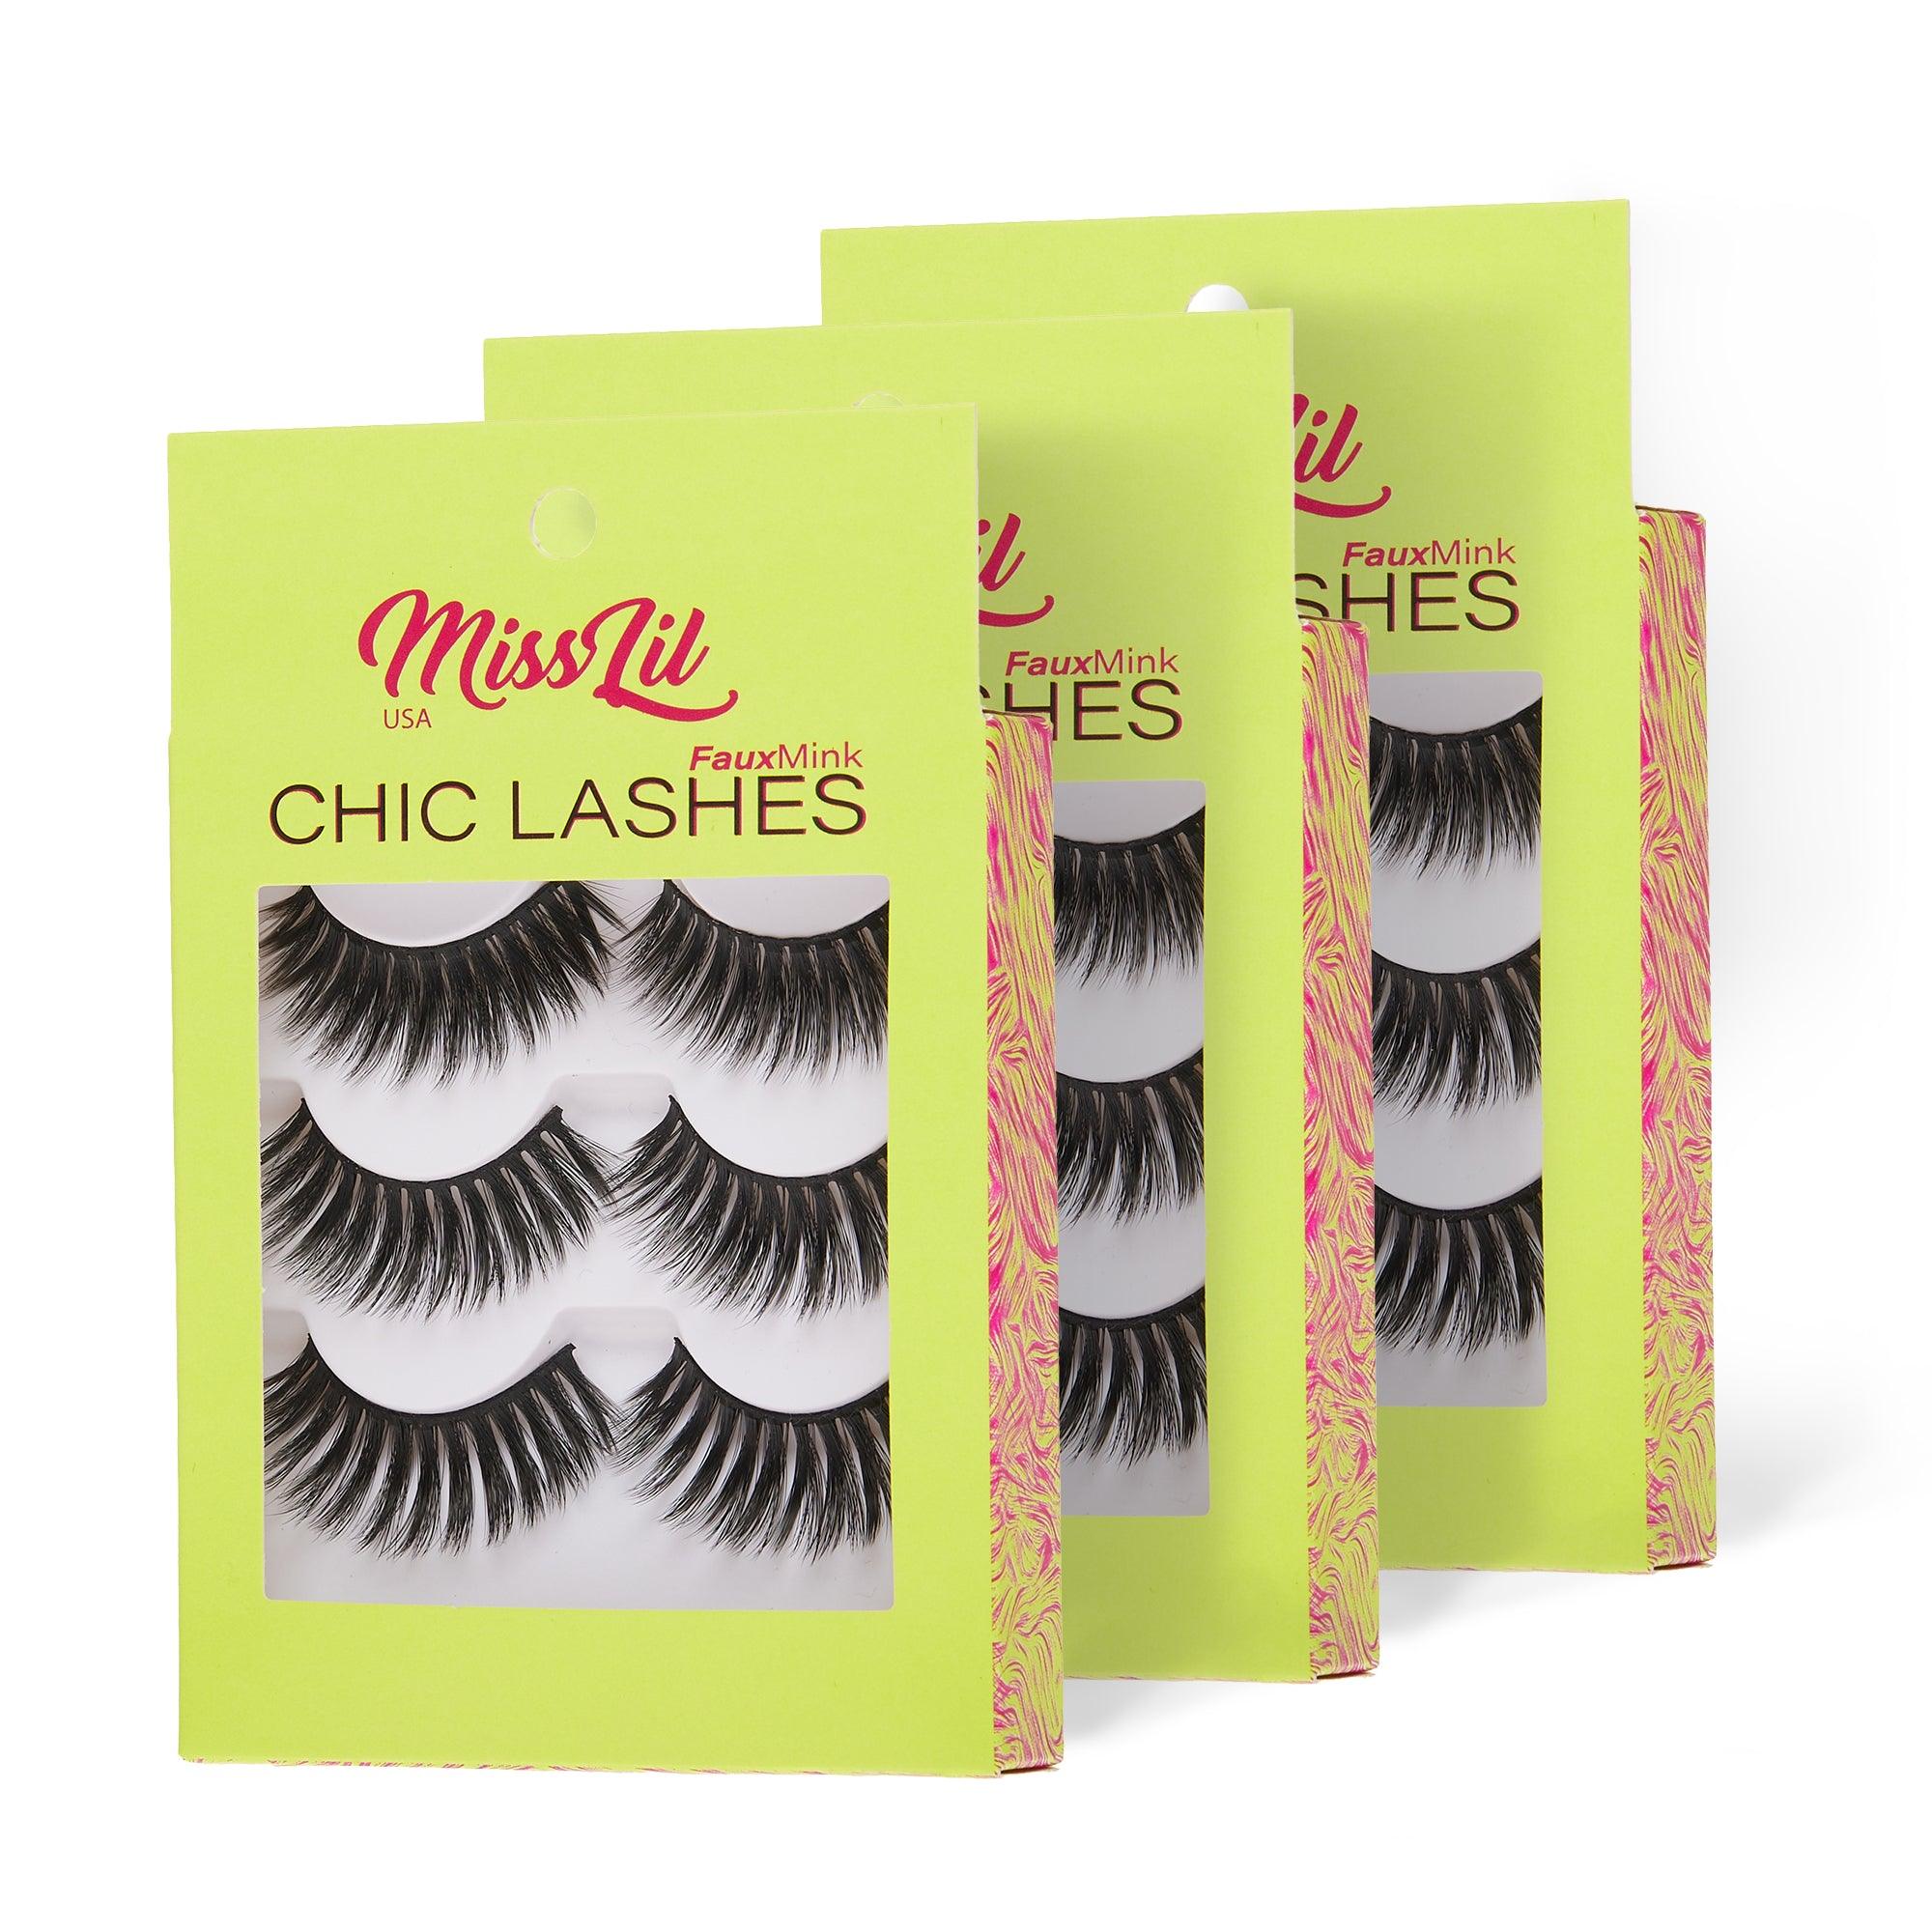 3-Pairs Lashes-Chic Lashes Collection #21 (Pack of 12) - Miss Lil USA Wholesale